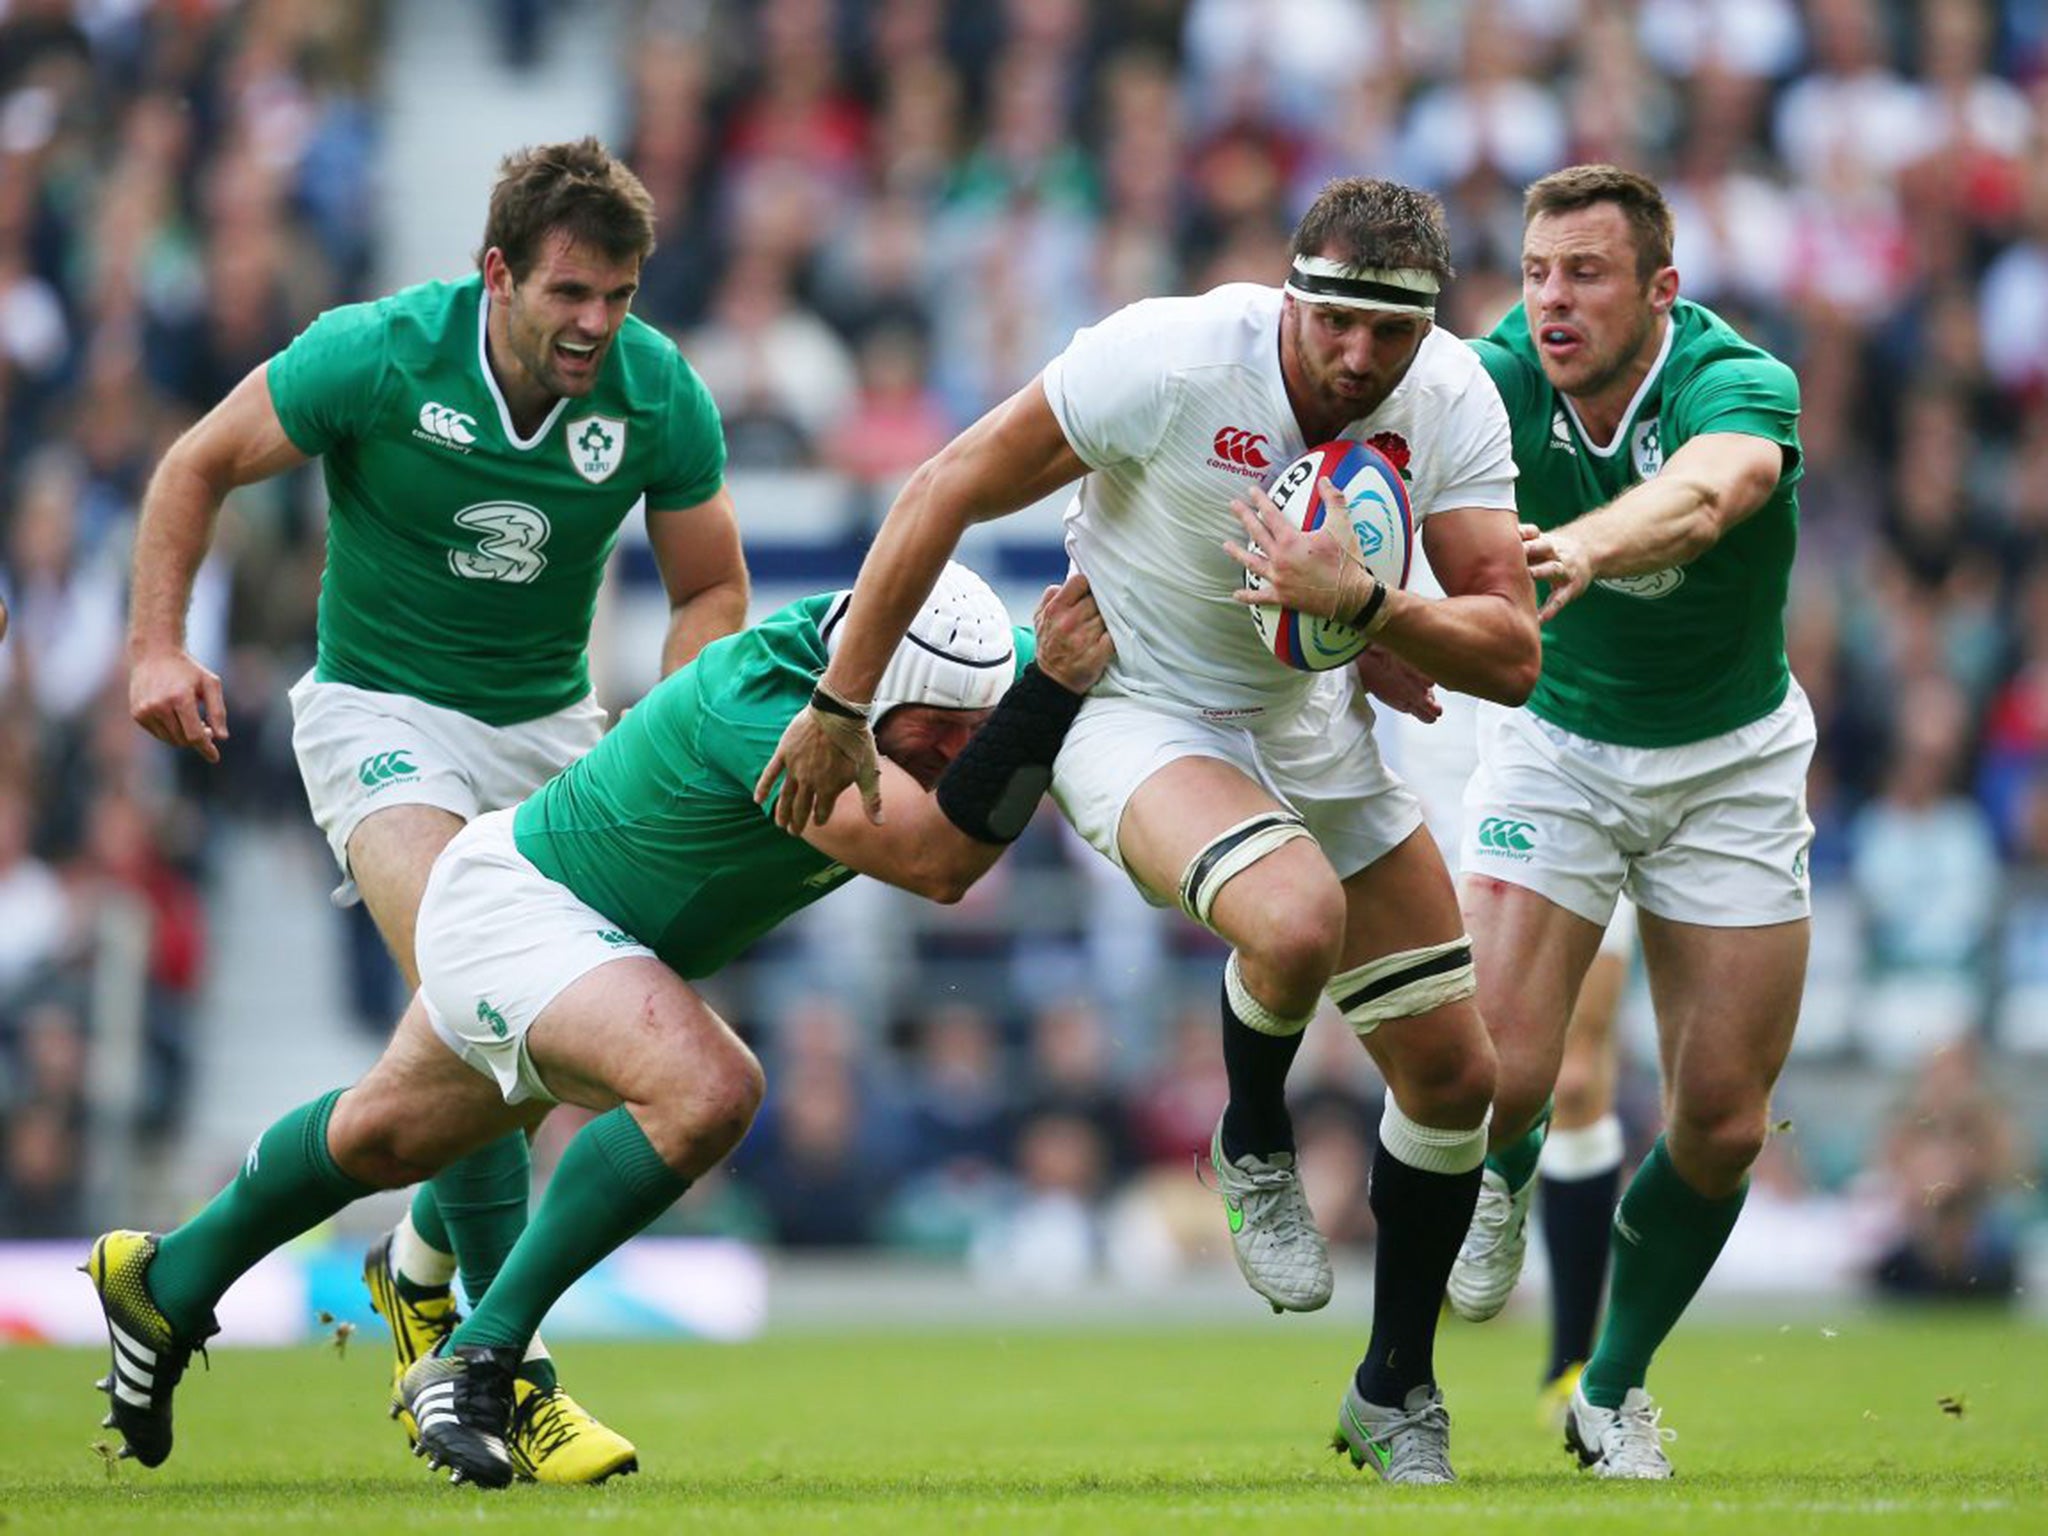 Tom Wood turned in a man-of-the-match performance against Ireland on Saturday